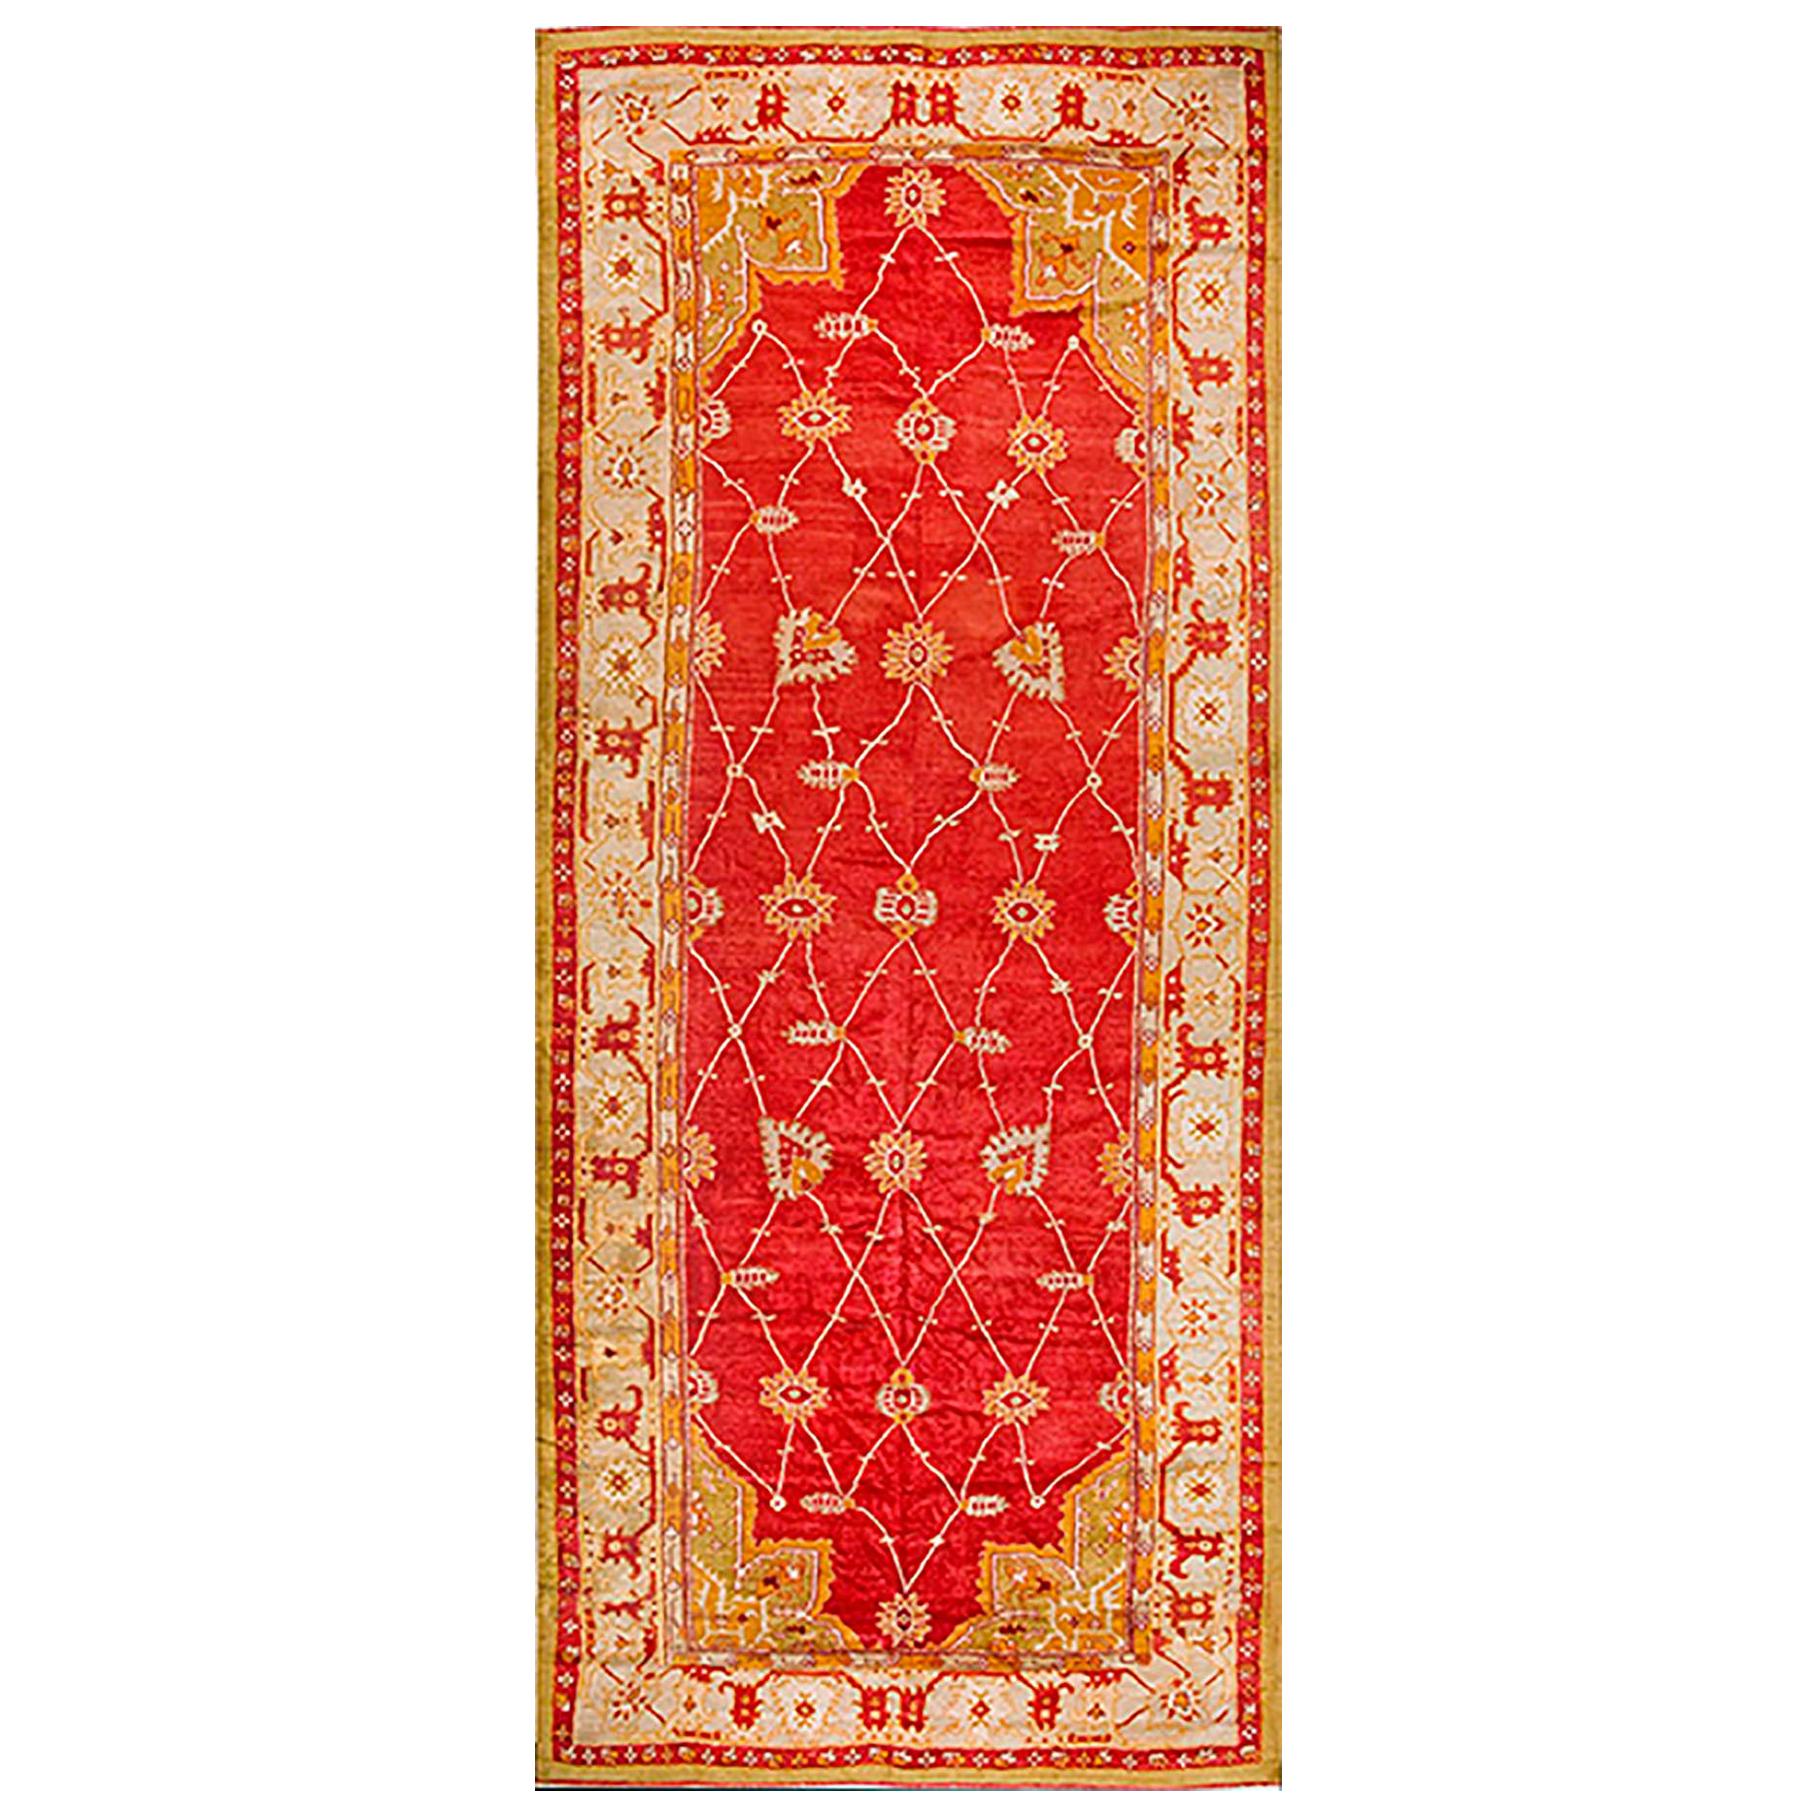 Early 20th Century Turkish Oushak Carpet  ( 9' x 21'5" - 275 x 653 ) For Sale